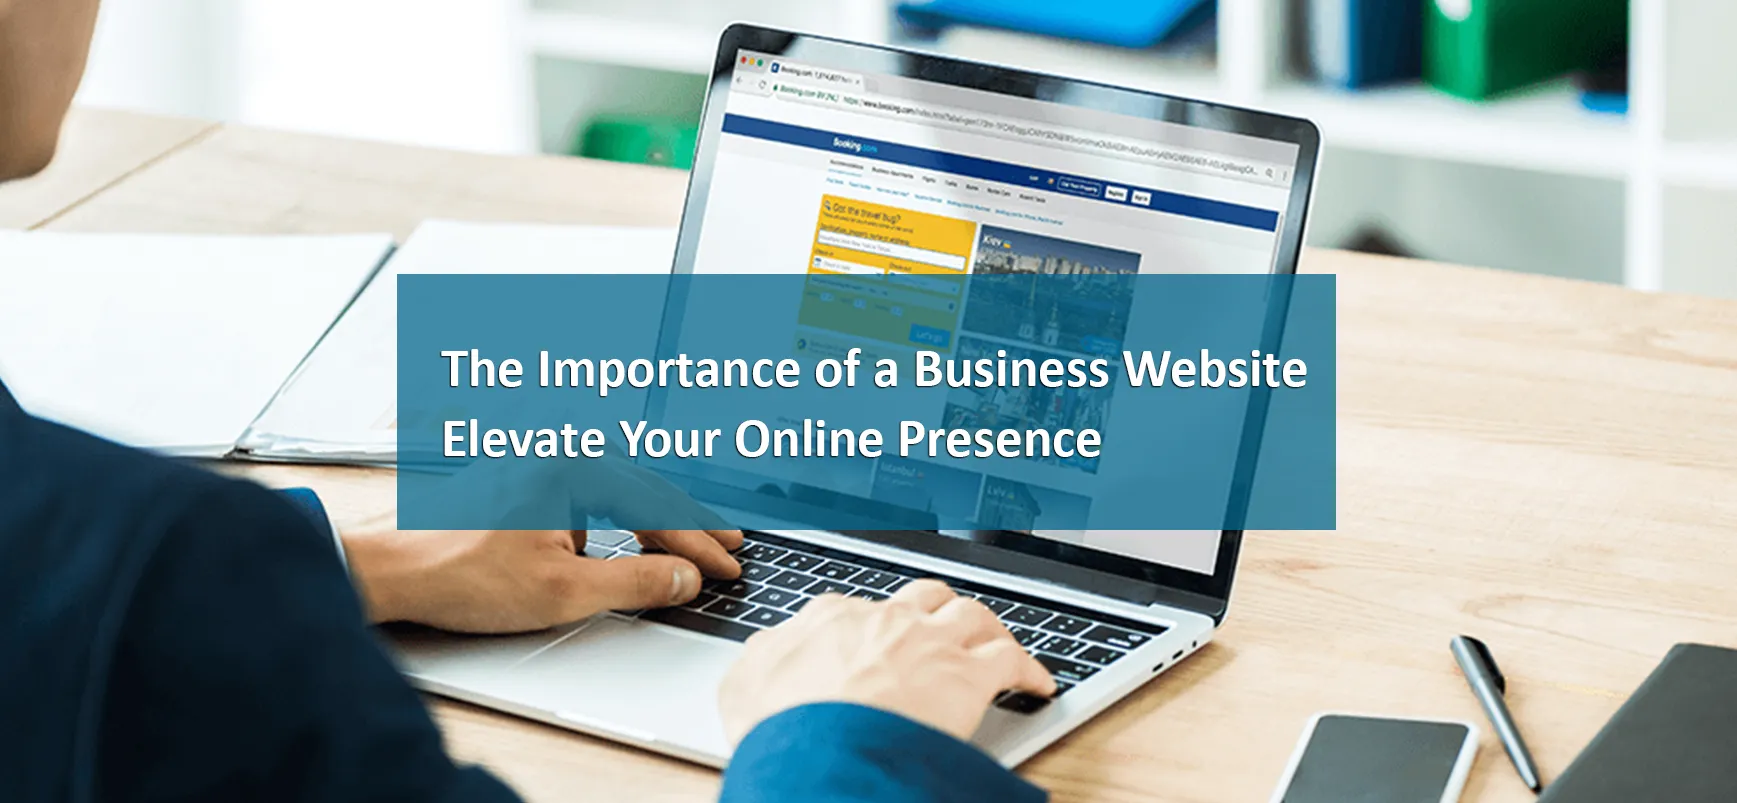 The Importance of a Business Website- Elevate Your Online Presence